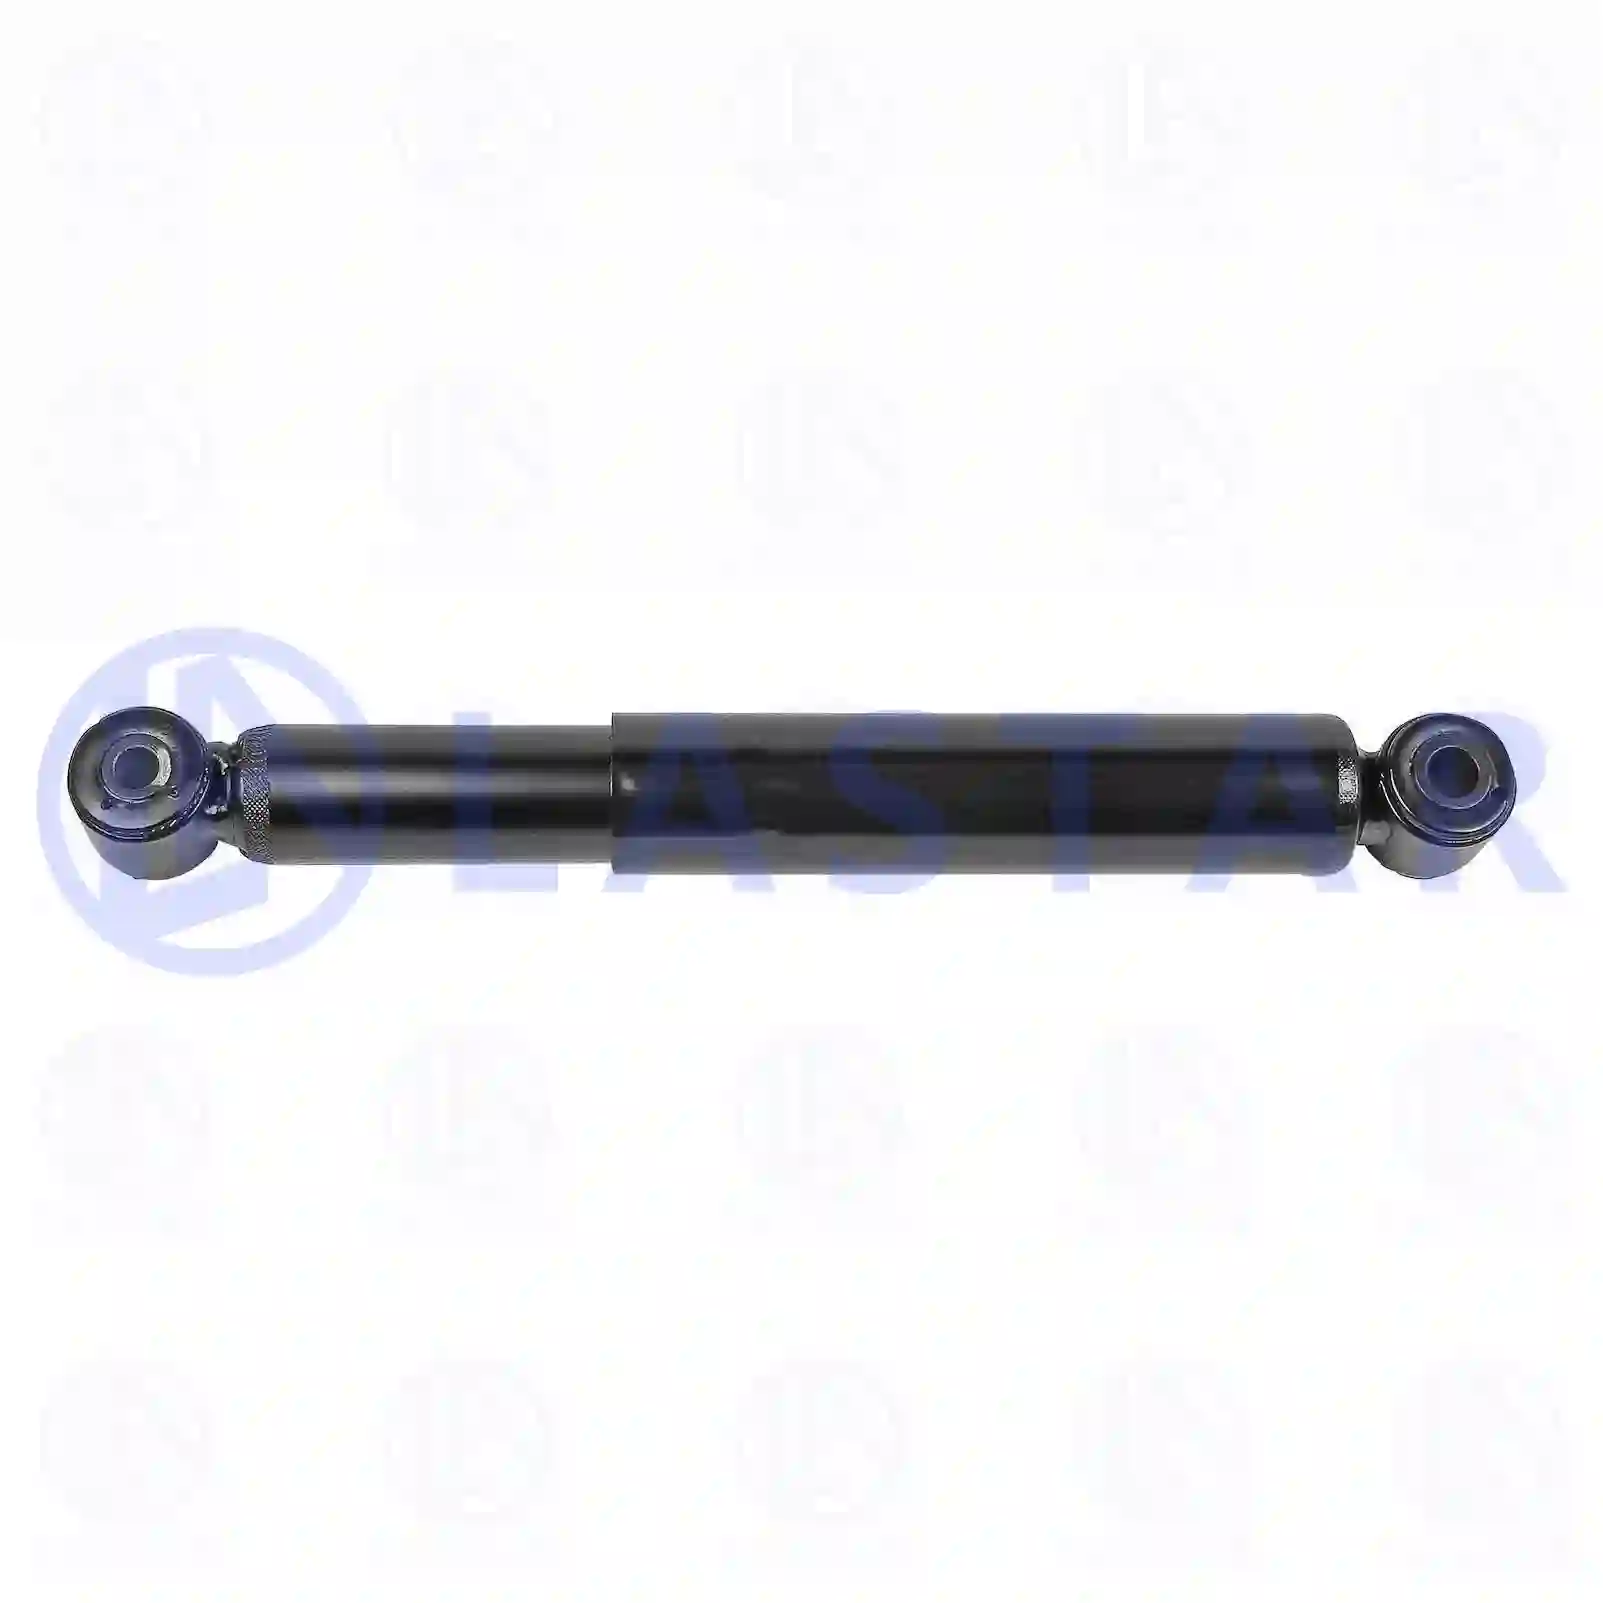 Shock absorber, 77727996, 6013200831, 6013201231, 6903207631, , , ||  77727996 Lastar Spare Part | Truck Spare Parts, Auotomotive Spare Parts Shock absorber, 77727996, 6013200831, 6013201231, 6903207631, , , ||  77727996 Lastar Spare Part | Truck Spare Parts, Auotomotive Spare Parts